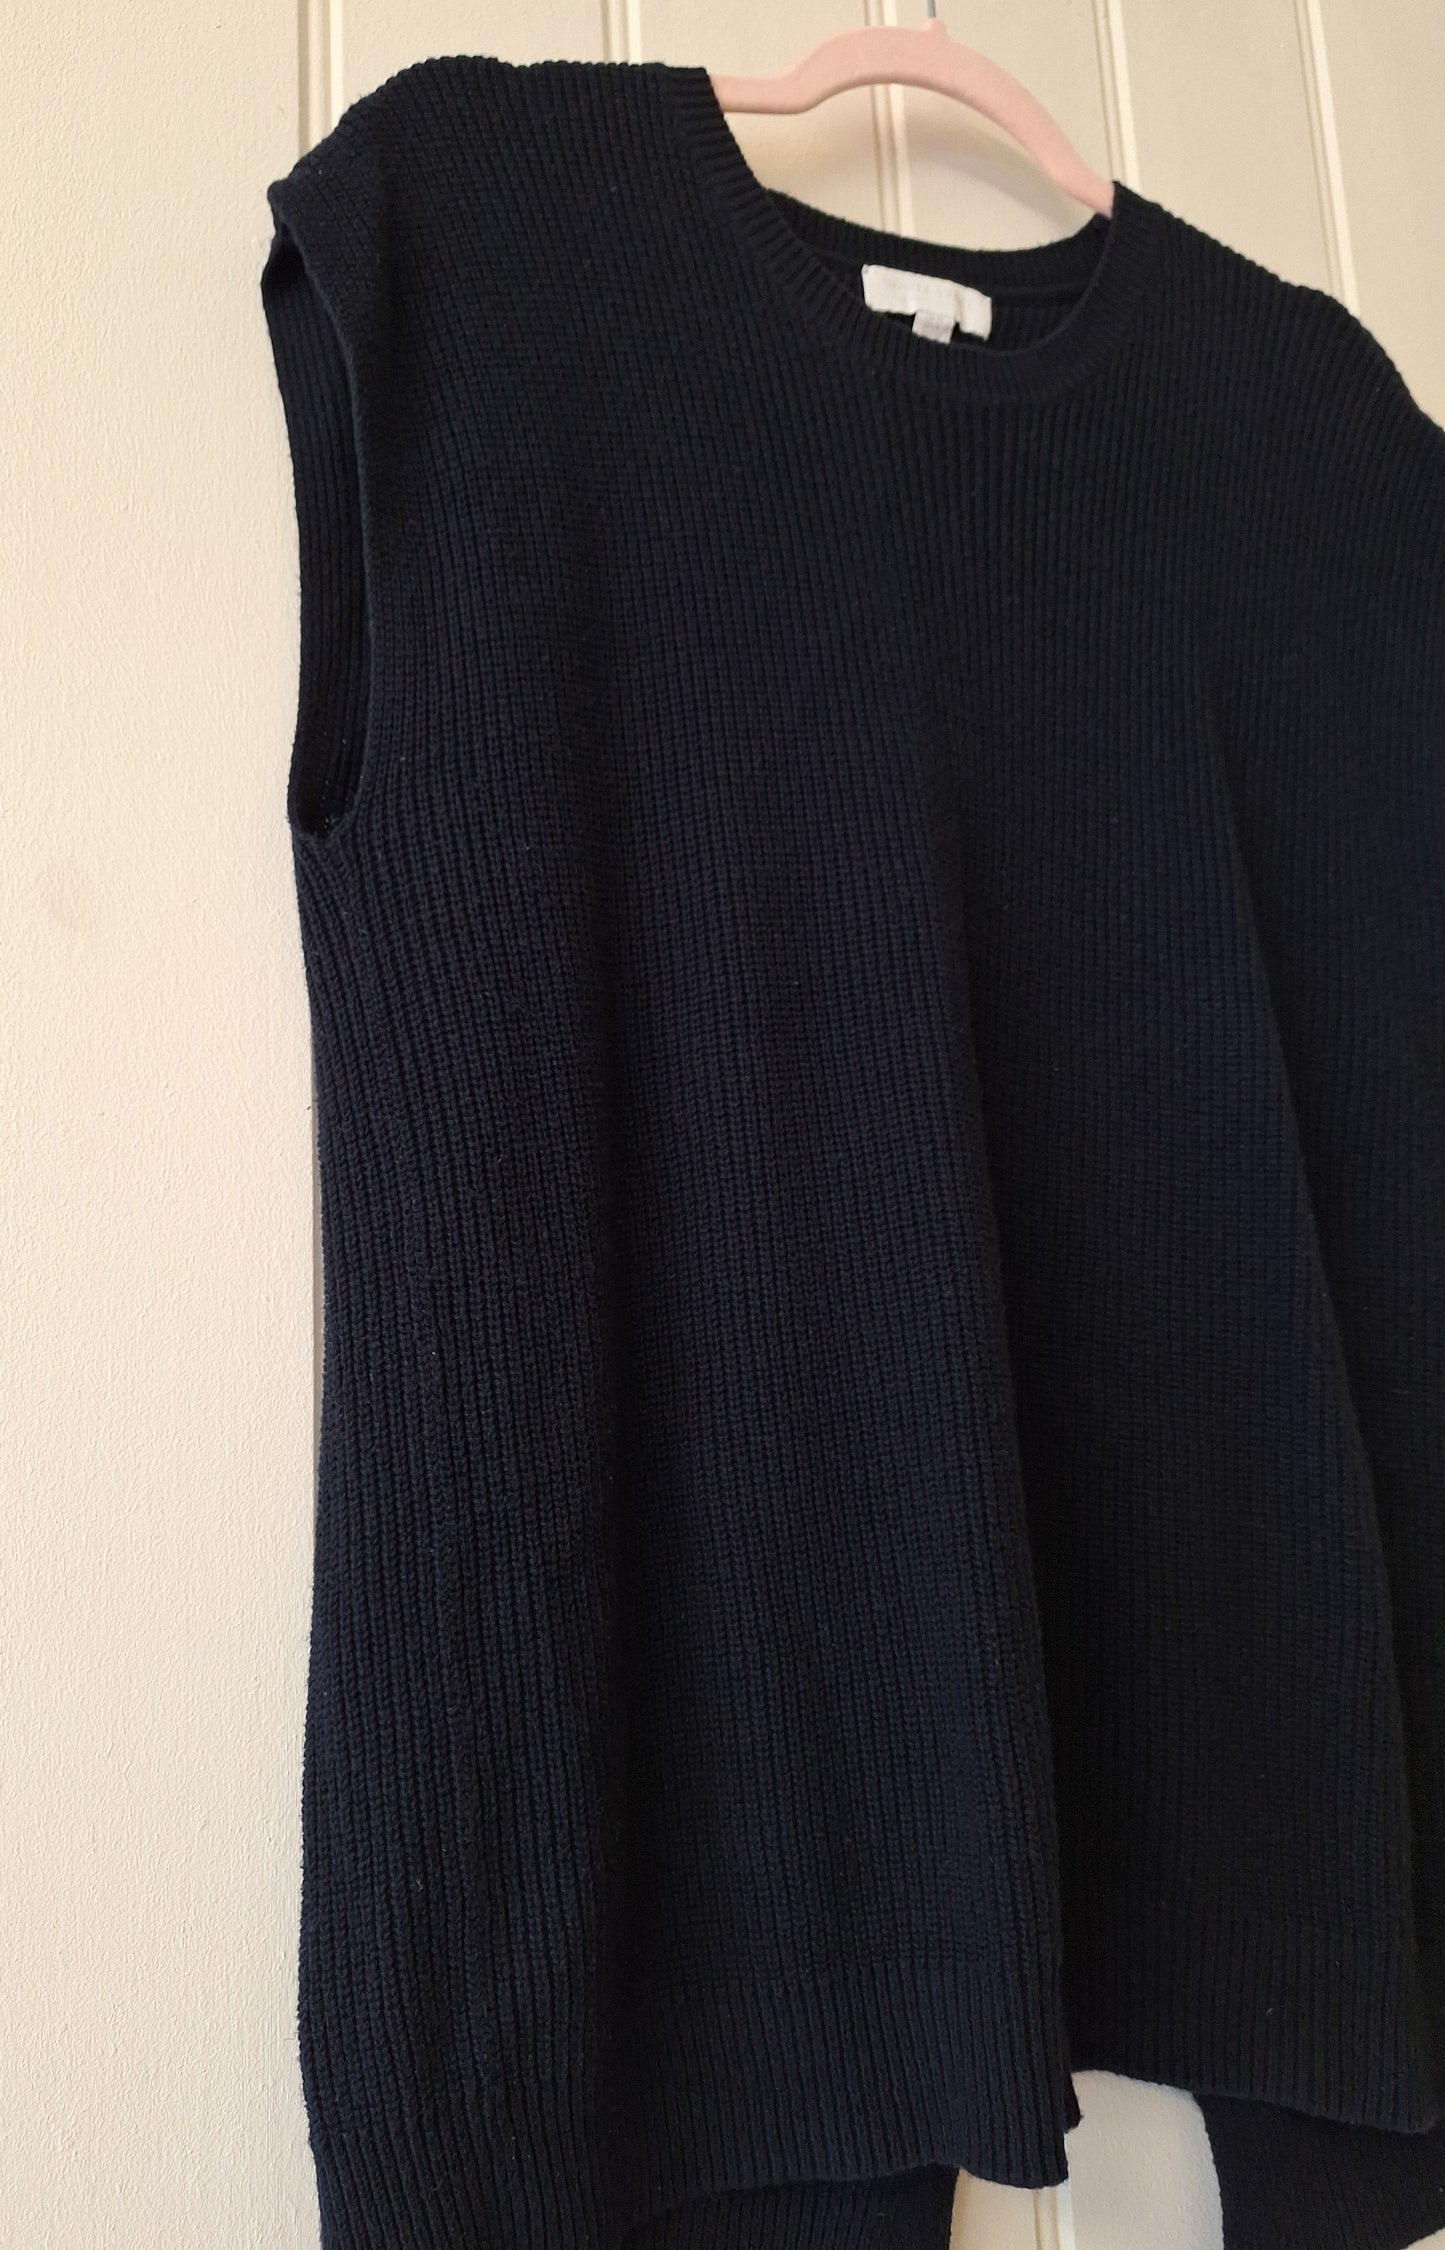 White label for White Company navy knit 10